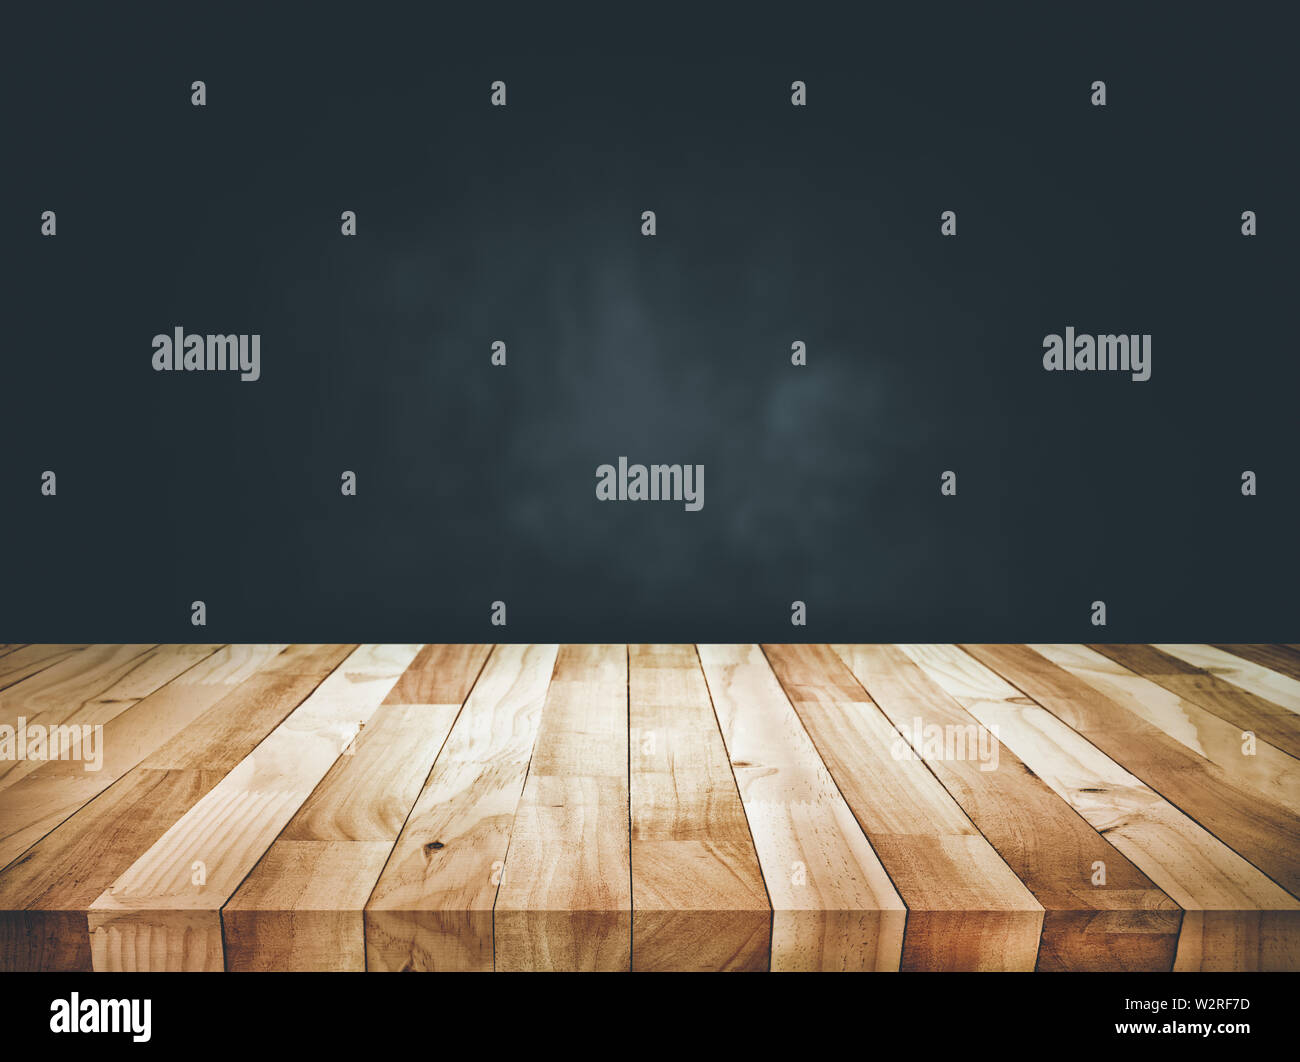 Empty Wood Table Top Counter On Dark Wall Background For Create Product Display Or Design Key Visual Layout Stock Photo Alamy